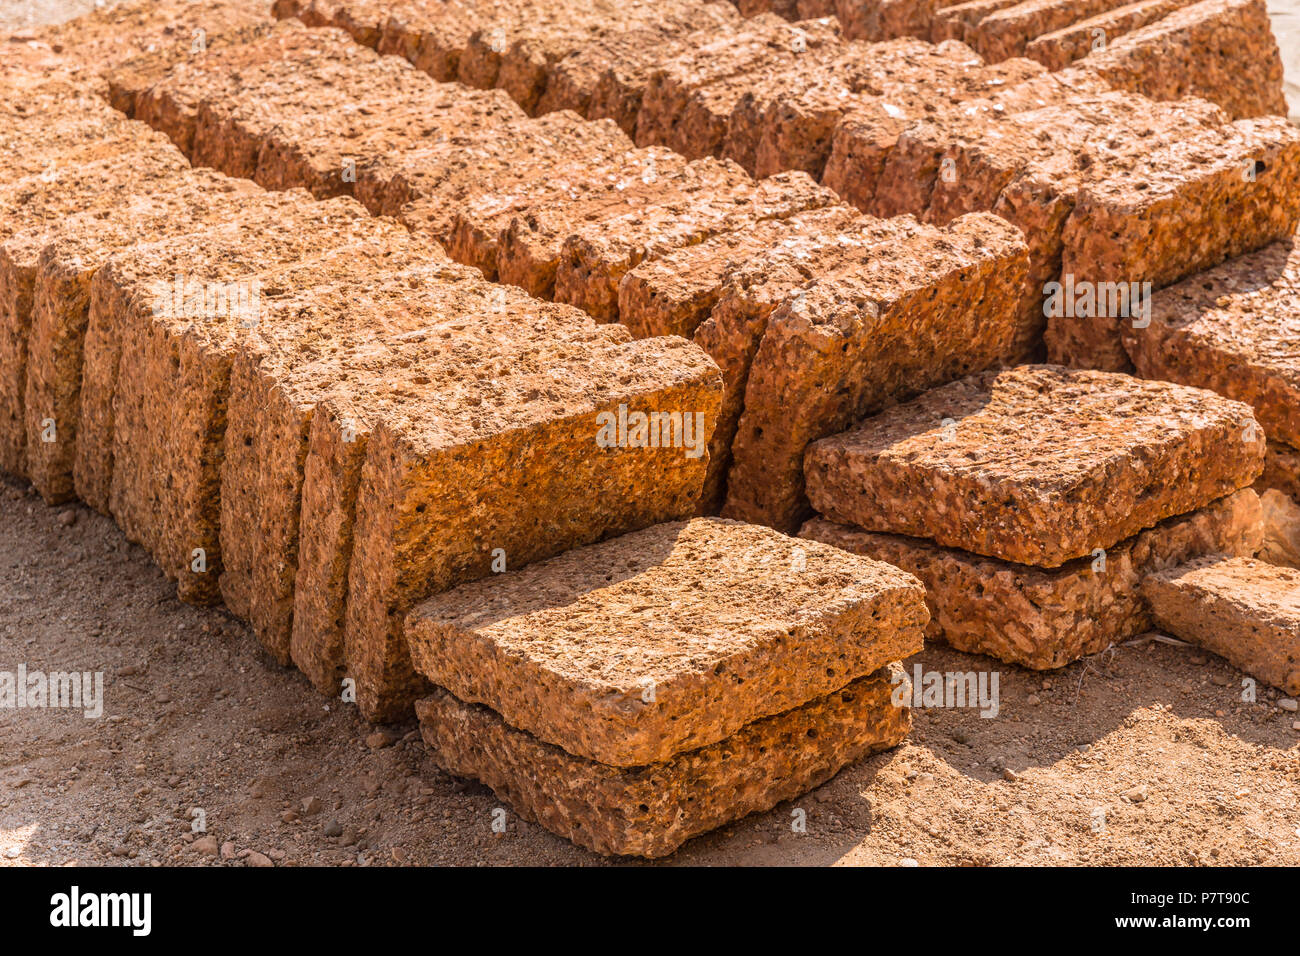 Laterite rock stone bricks plate from nature reddish rusty red color from rich in iron oxide Stock Photo